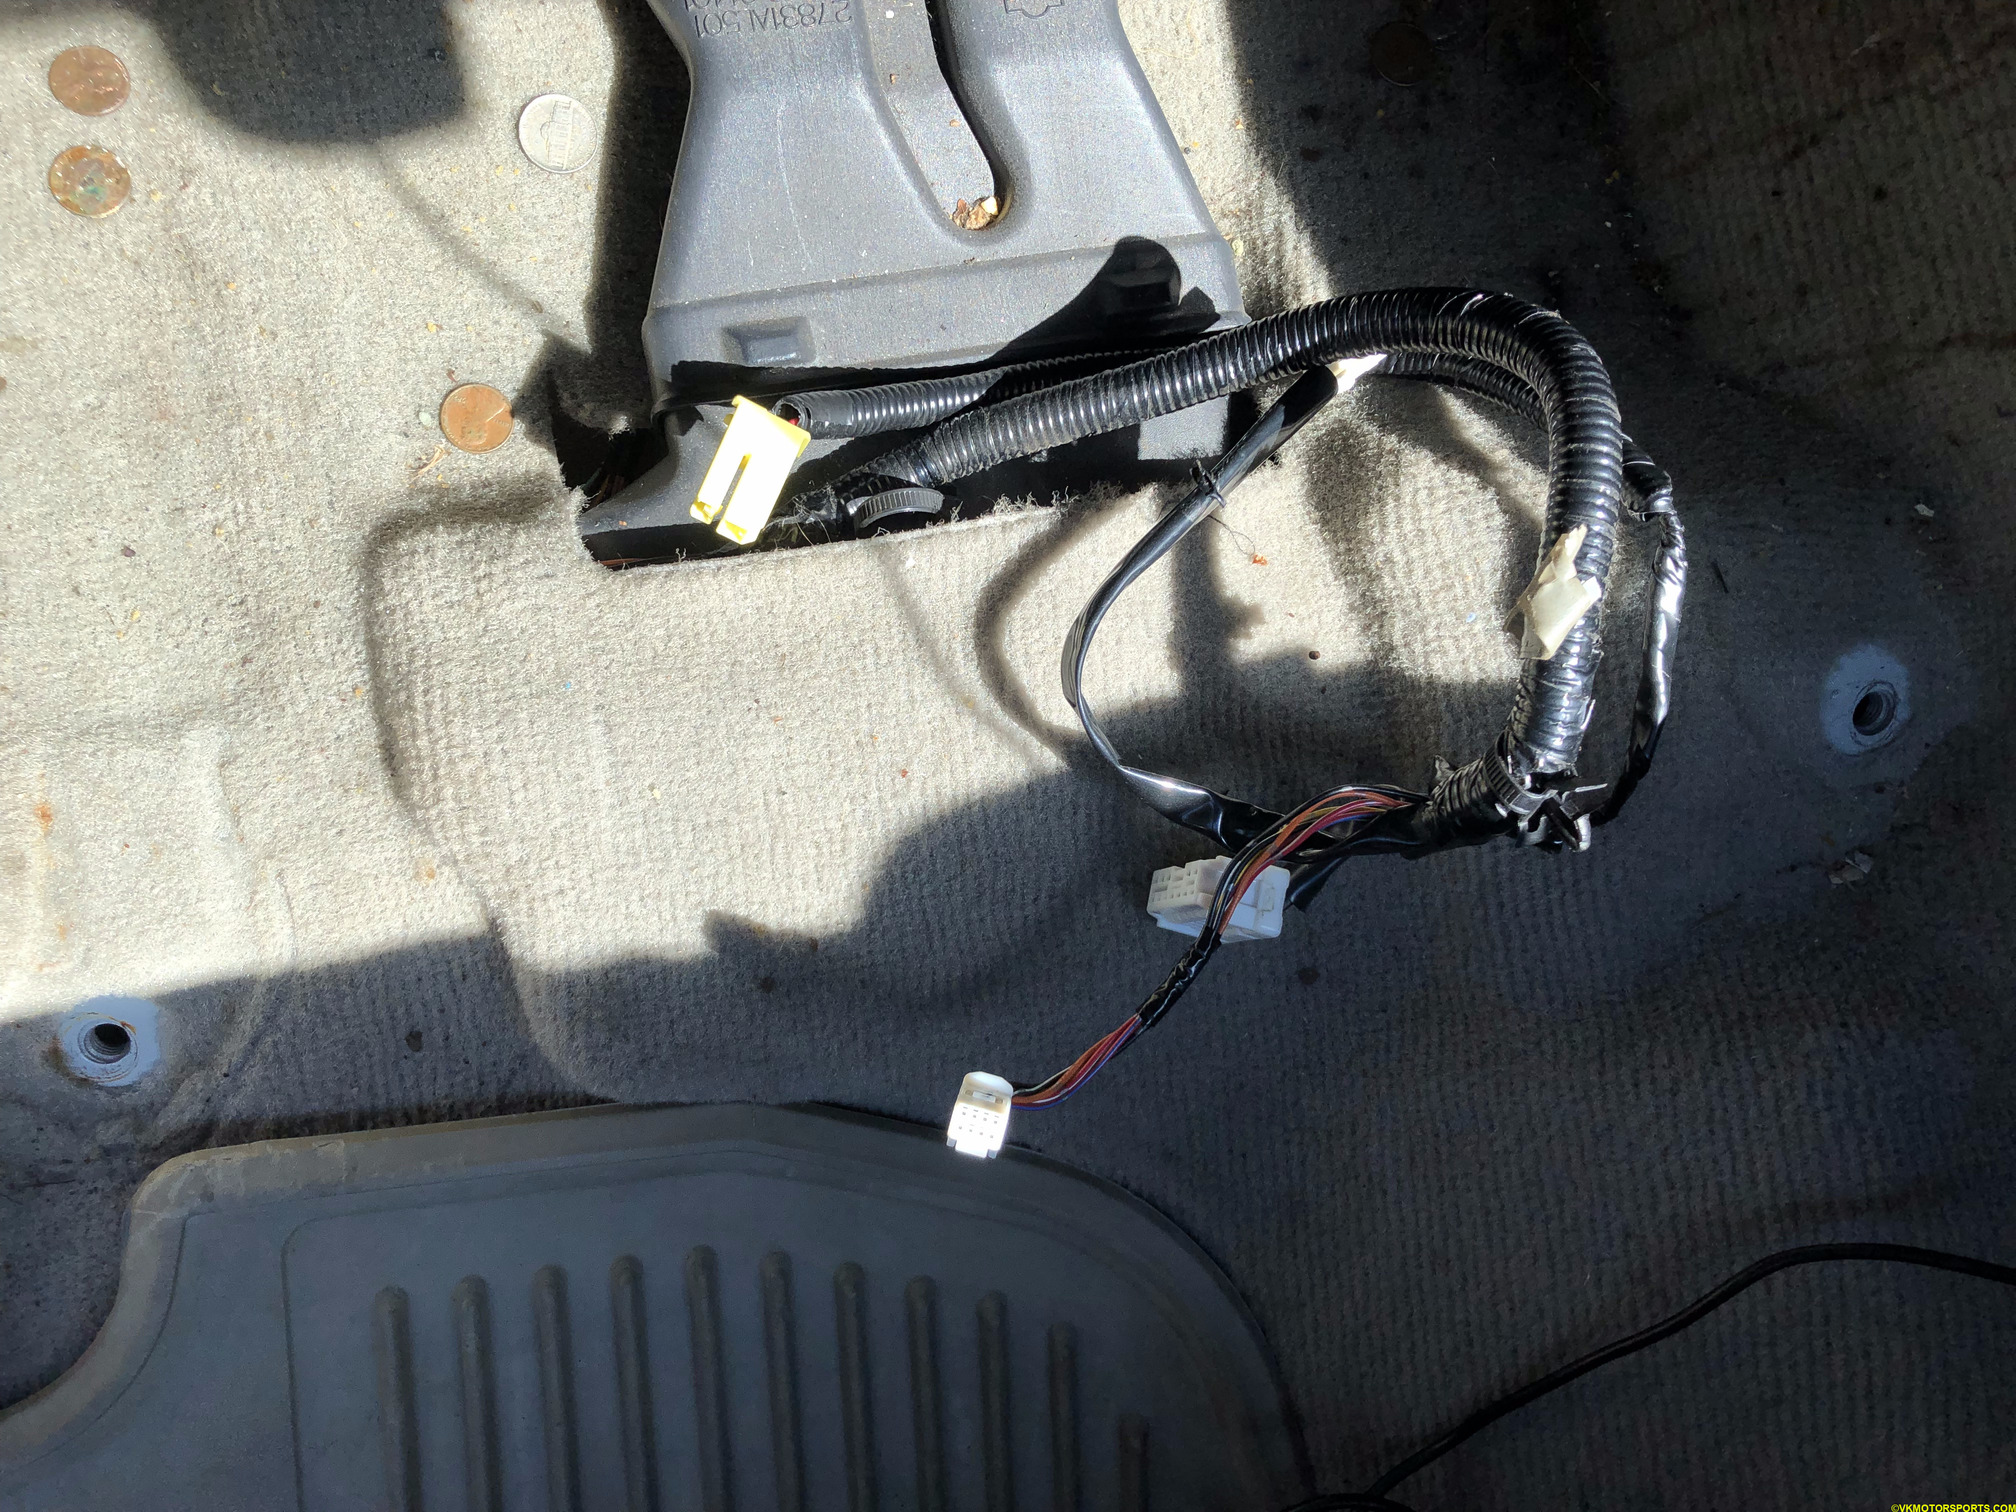 Figure 3g. All connectors have been disconnected and the seat removed